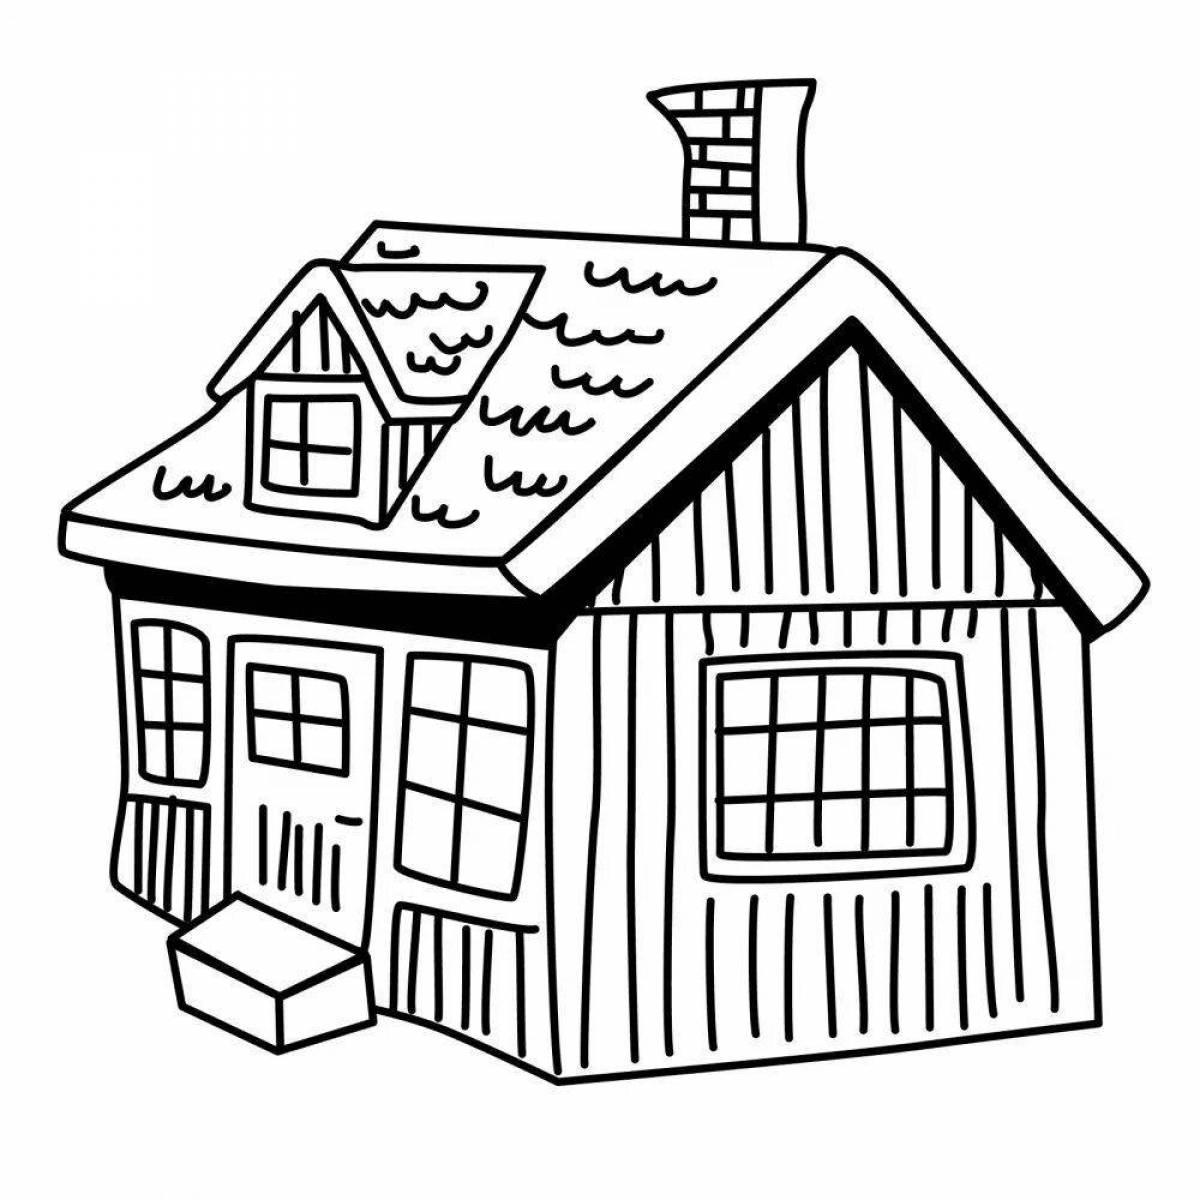 Drawing of a bright house